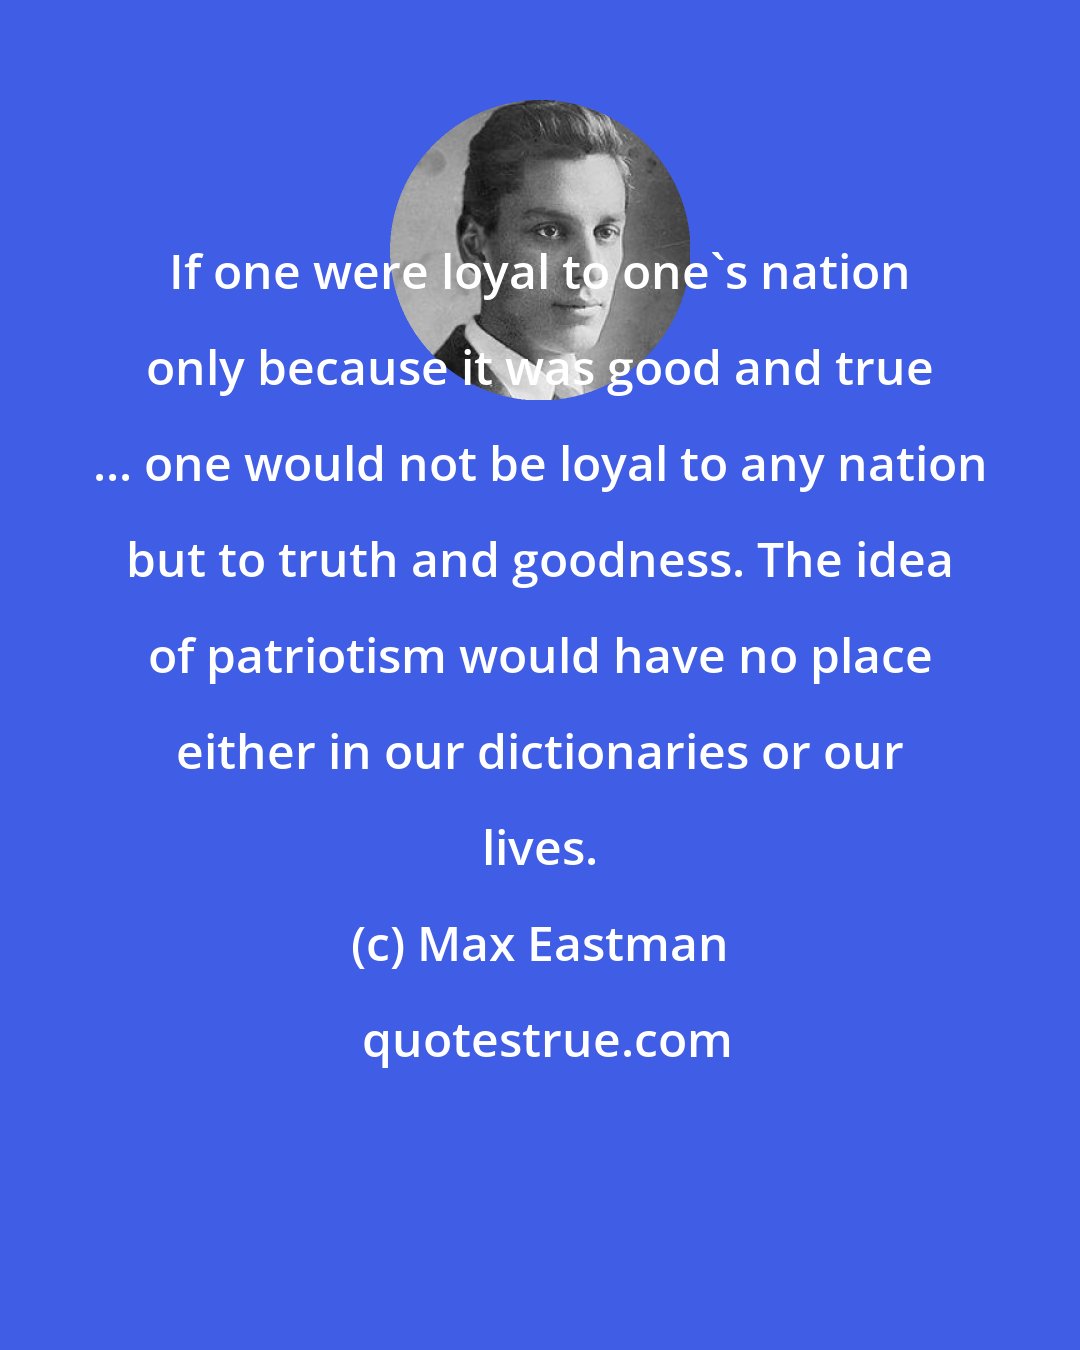 Max Eastman: If one were loyal to one's nation only because it was good and true ... one would not be loyal to any nation but to truth and goodness. The idea of patriotism would have no place either in our dictionaries or our lives.